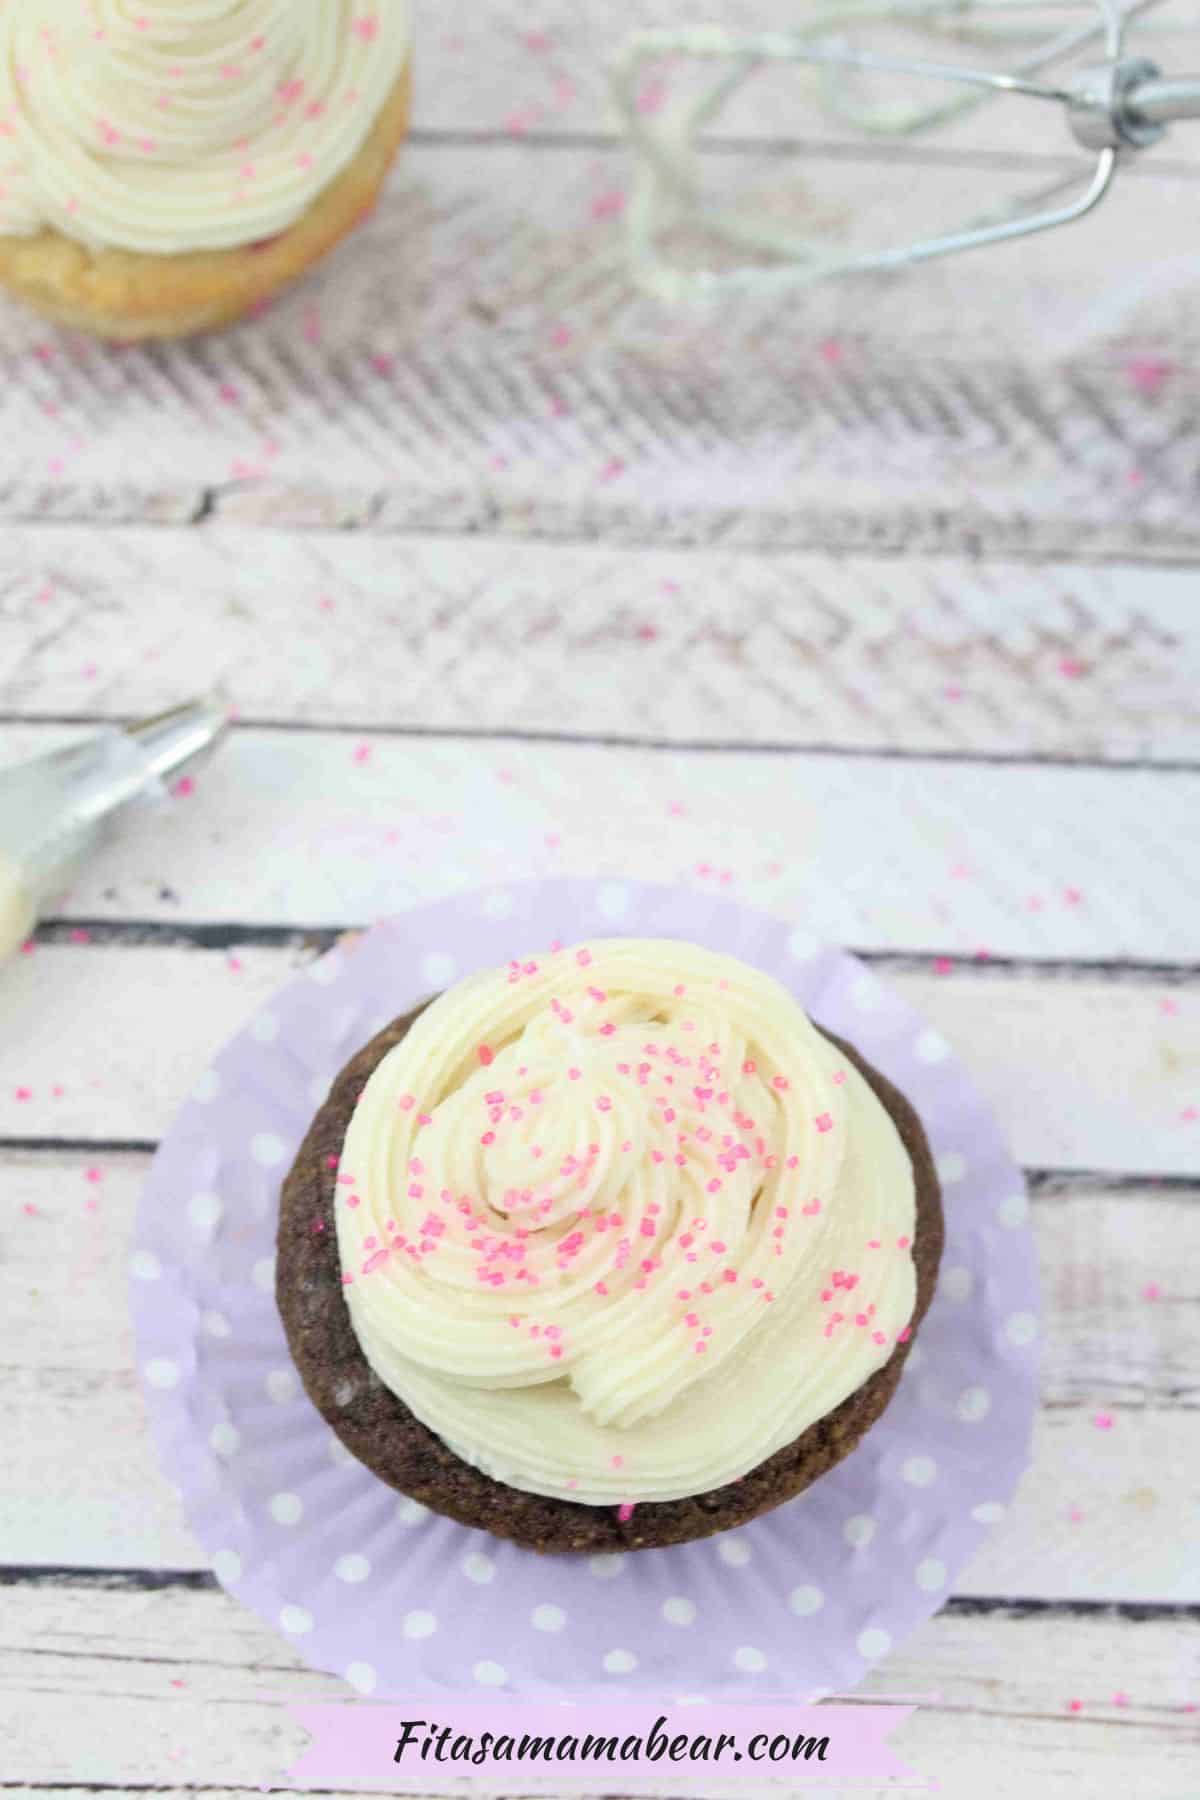 Chocolate cupcake with dairy-free buttercream frosting on a purple cupcake liner with a piping tool and more cupcake behind it.